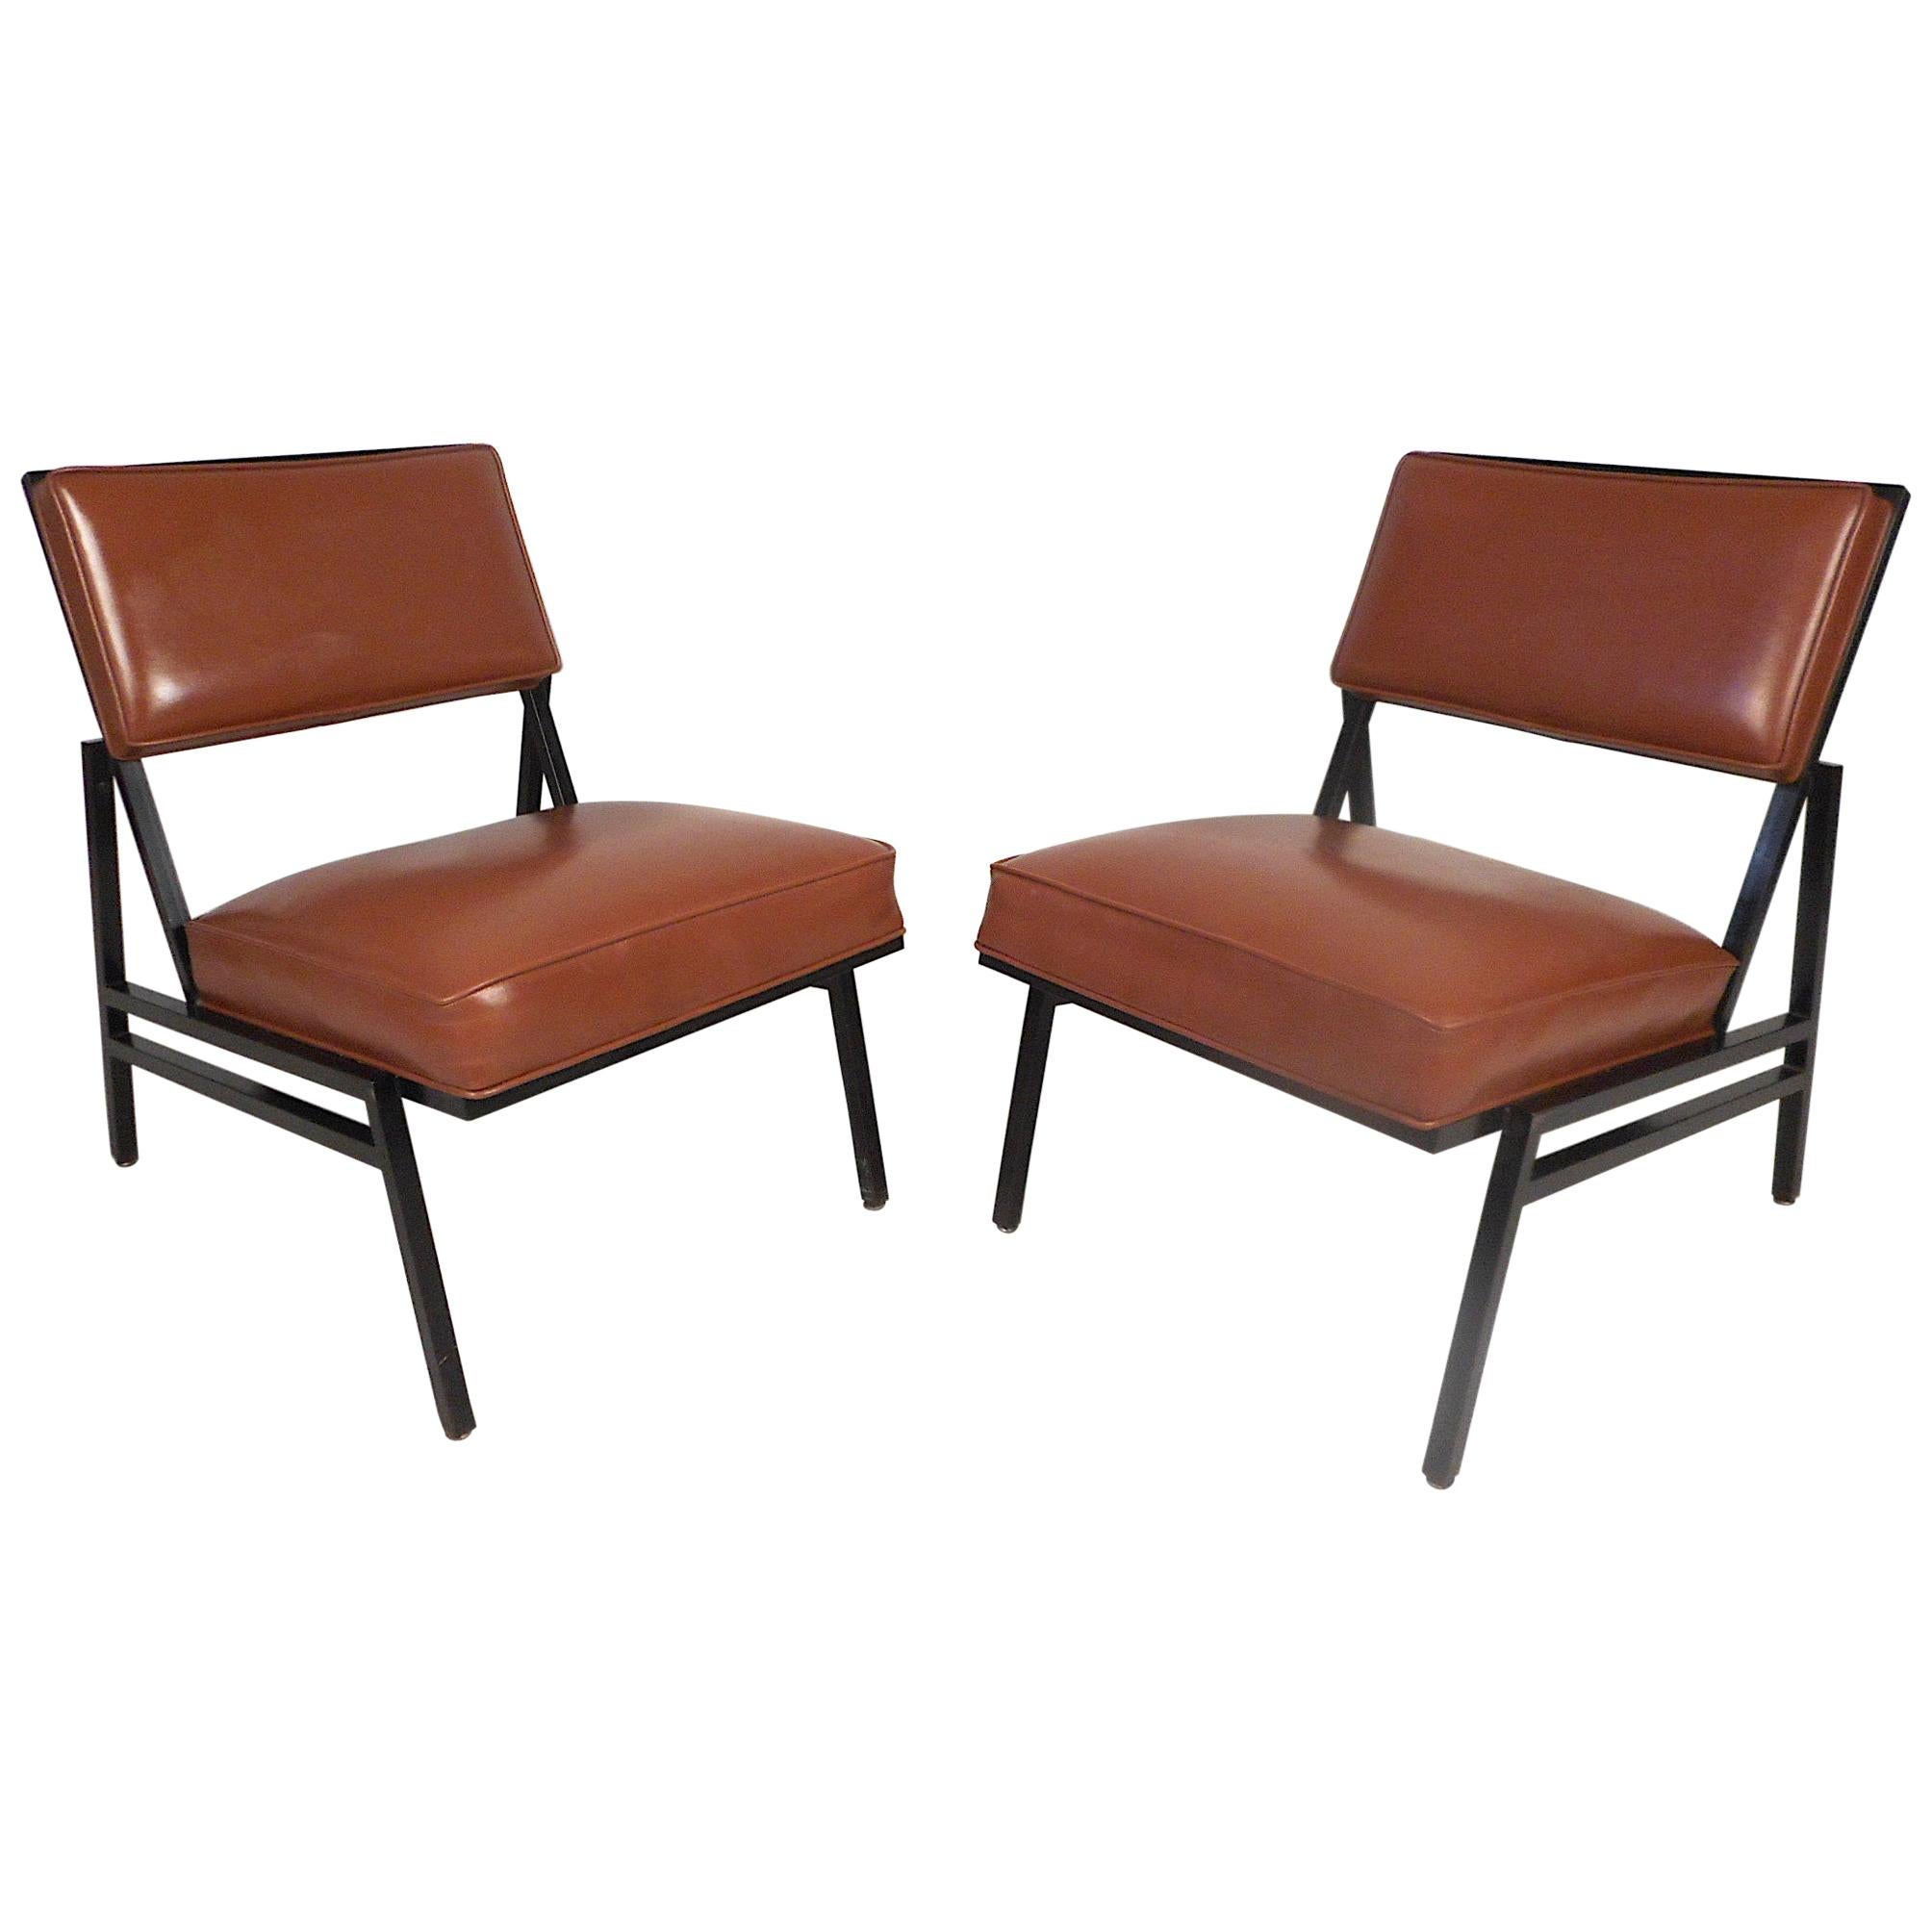 Midcentury Lounge Chairs by Steelcase, a Pair